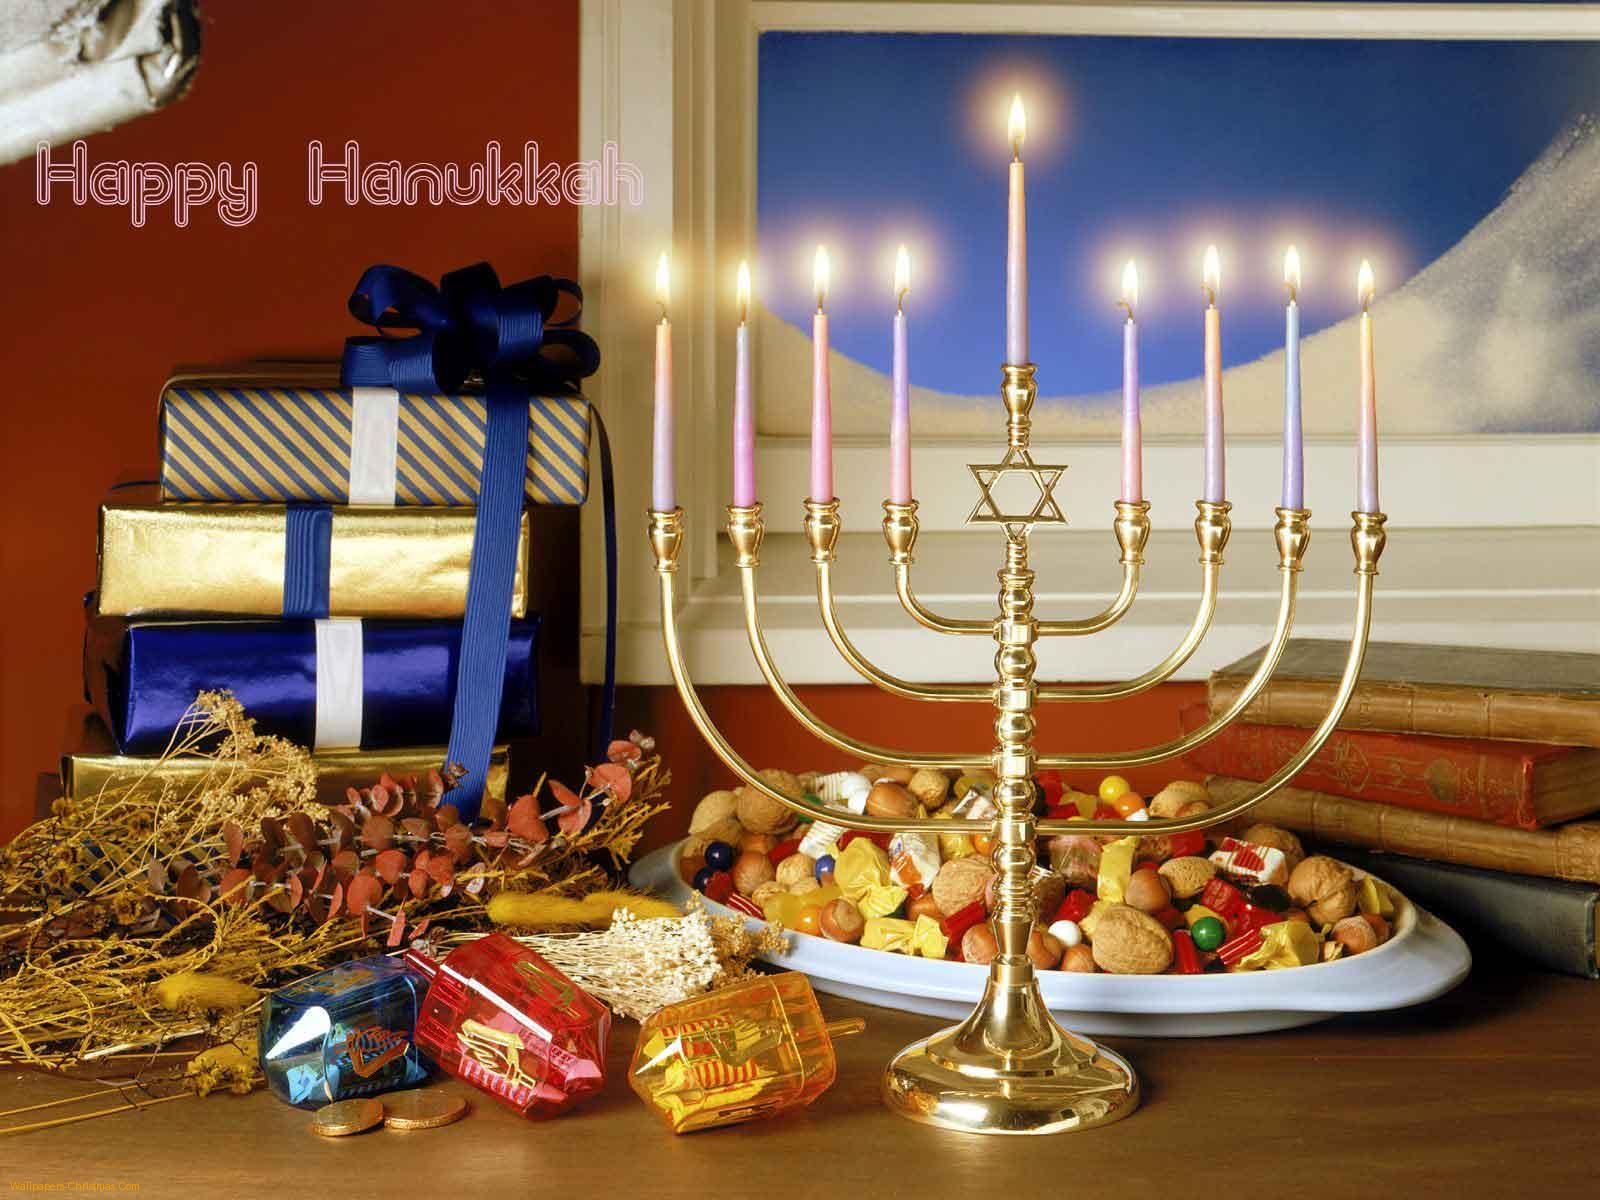  Free Hanukkah Wallpaper Backgrounds of all time Check it out now 